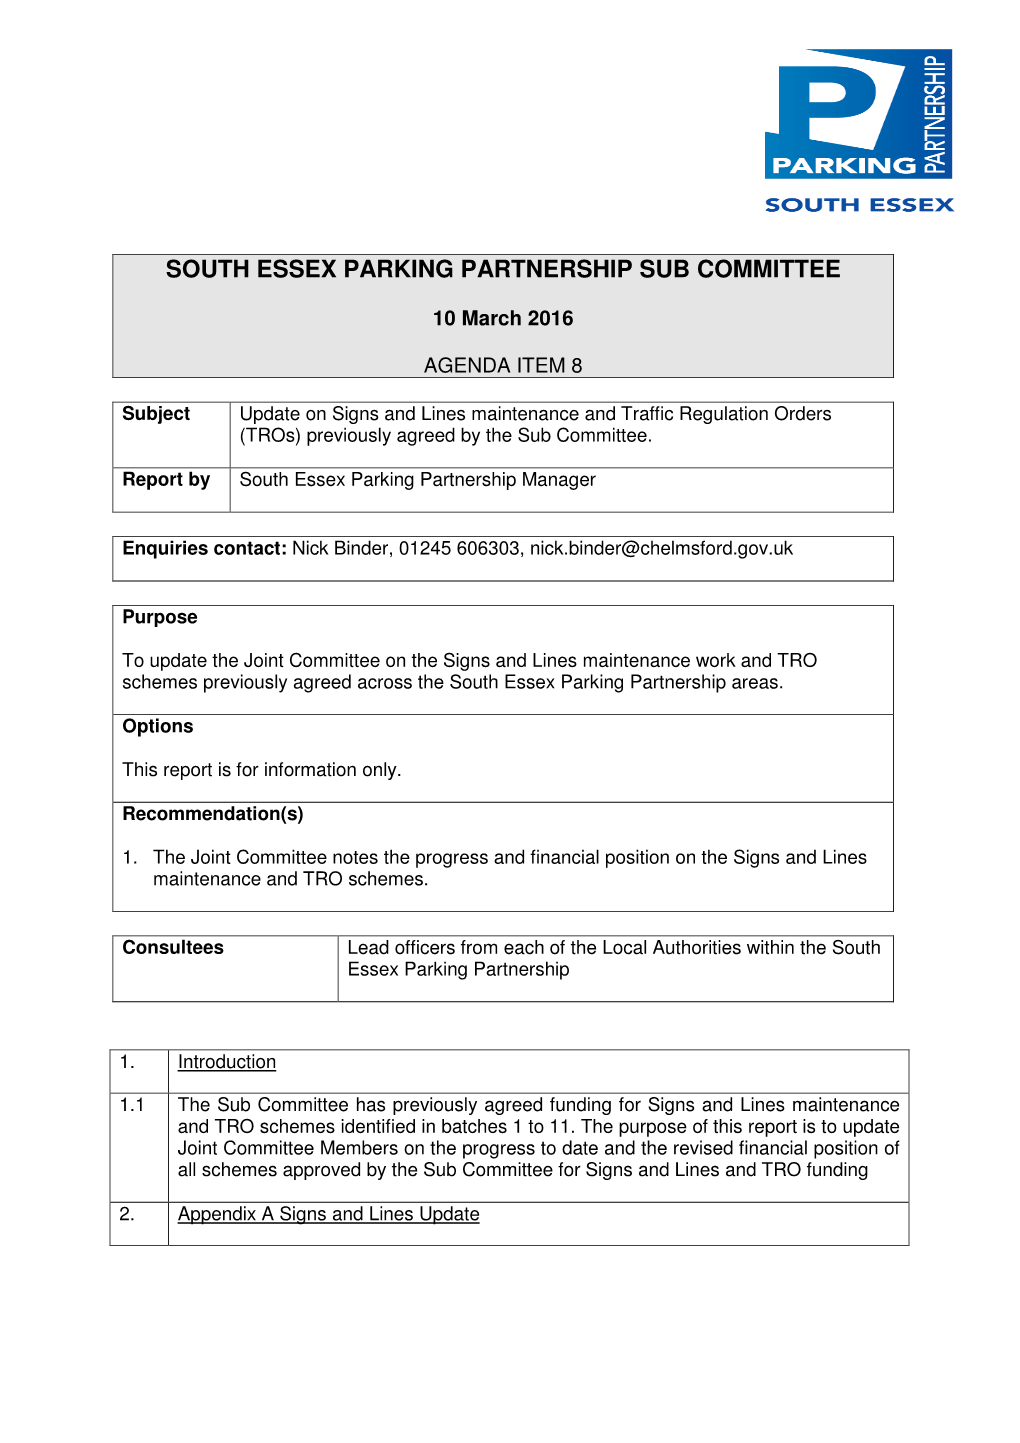 South Essex Parking Partnership Sub Committee